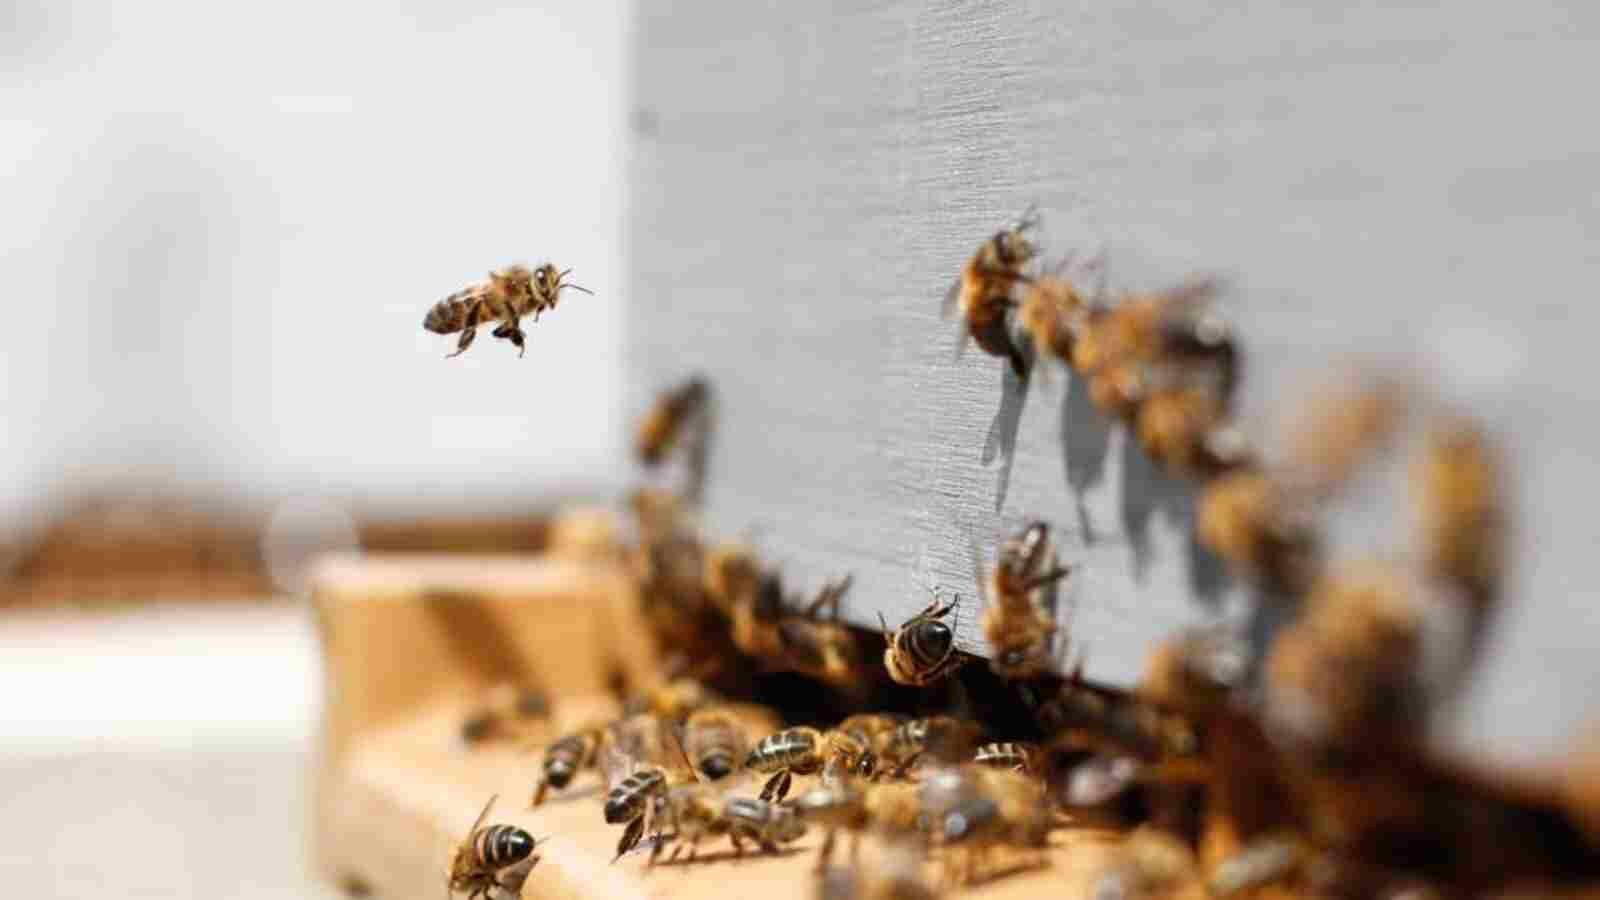 13 tourists injured in bee attack